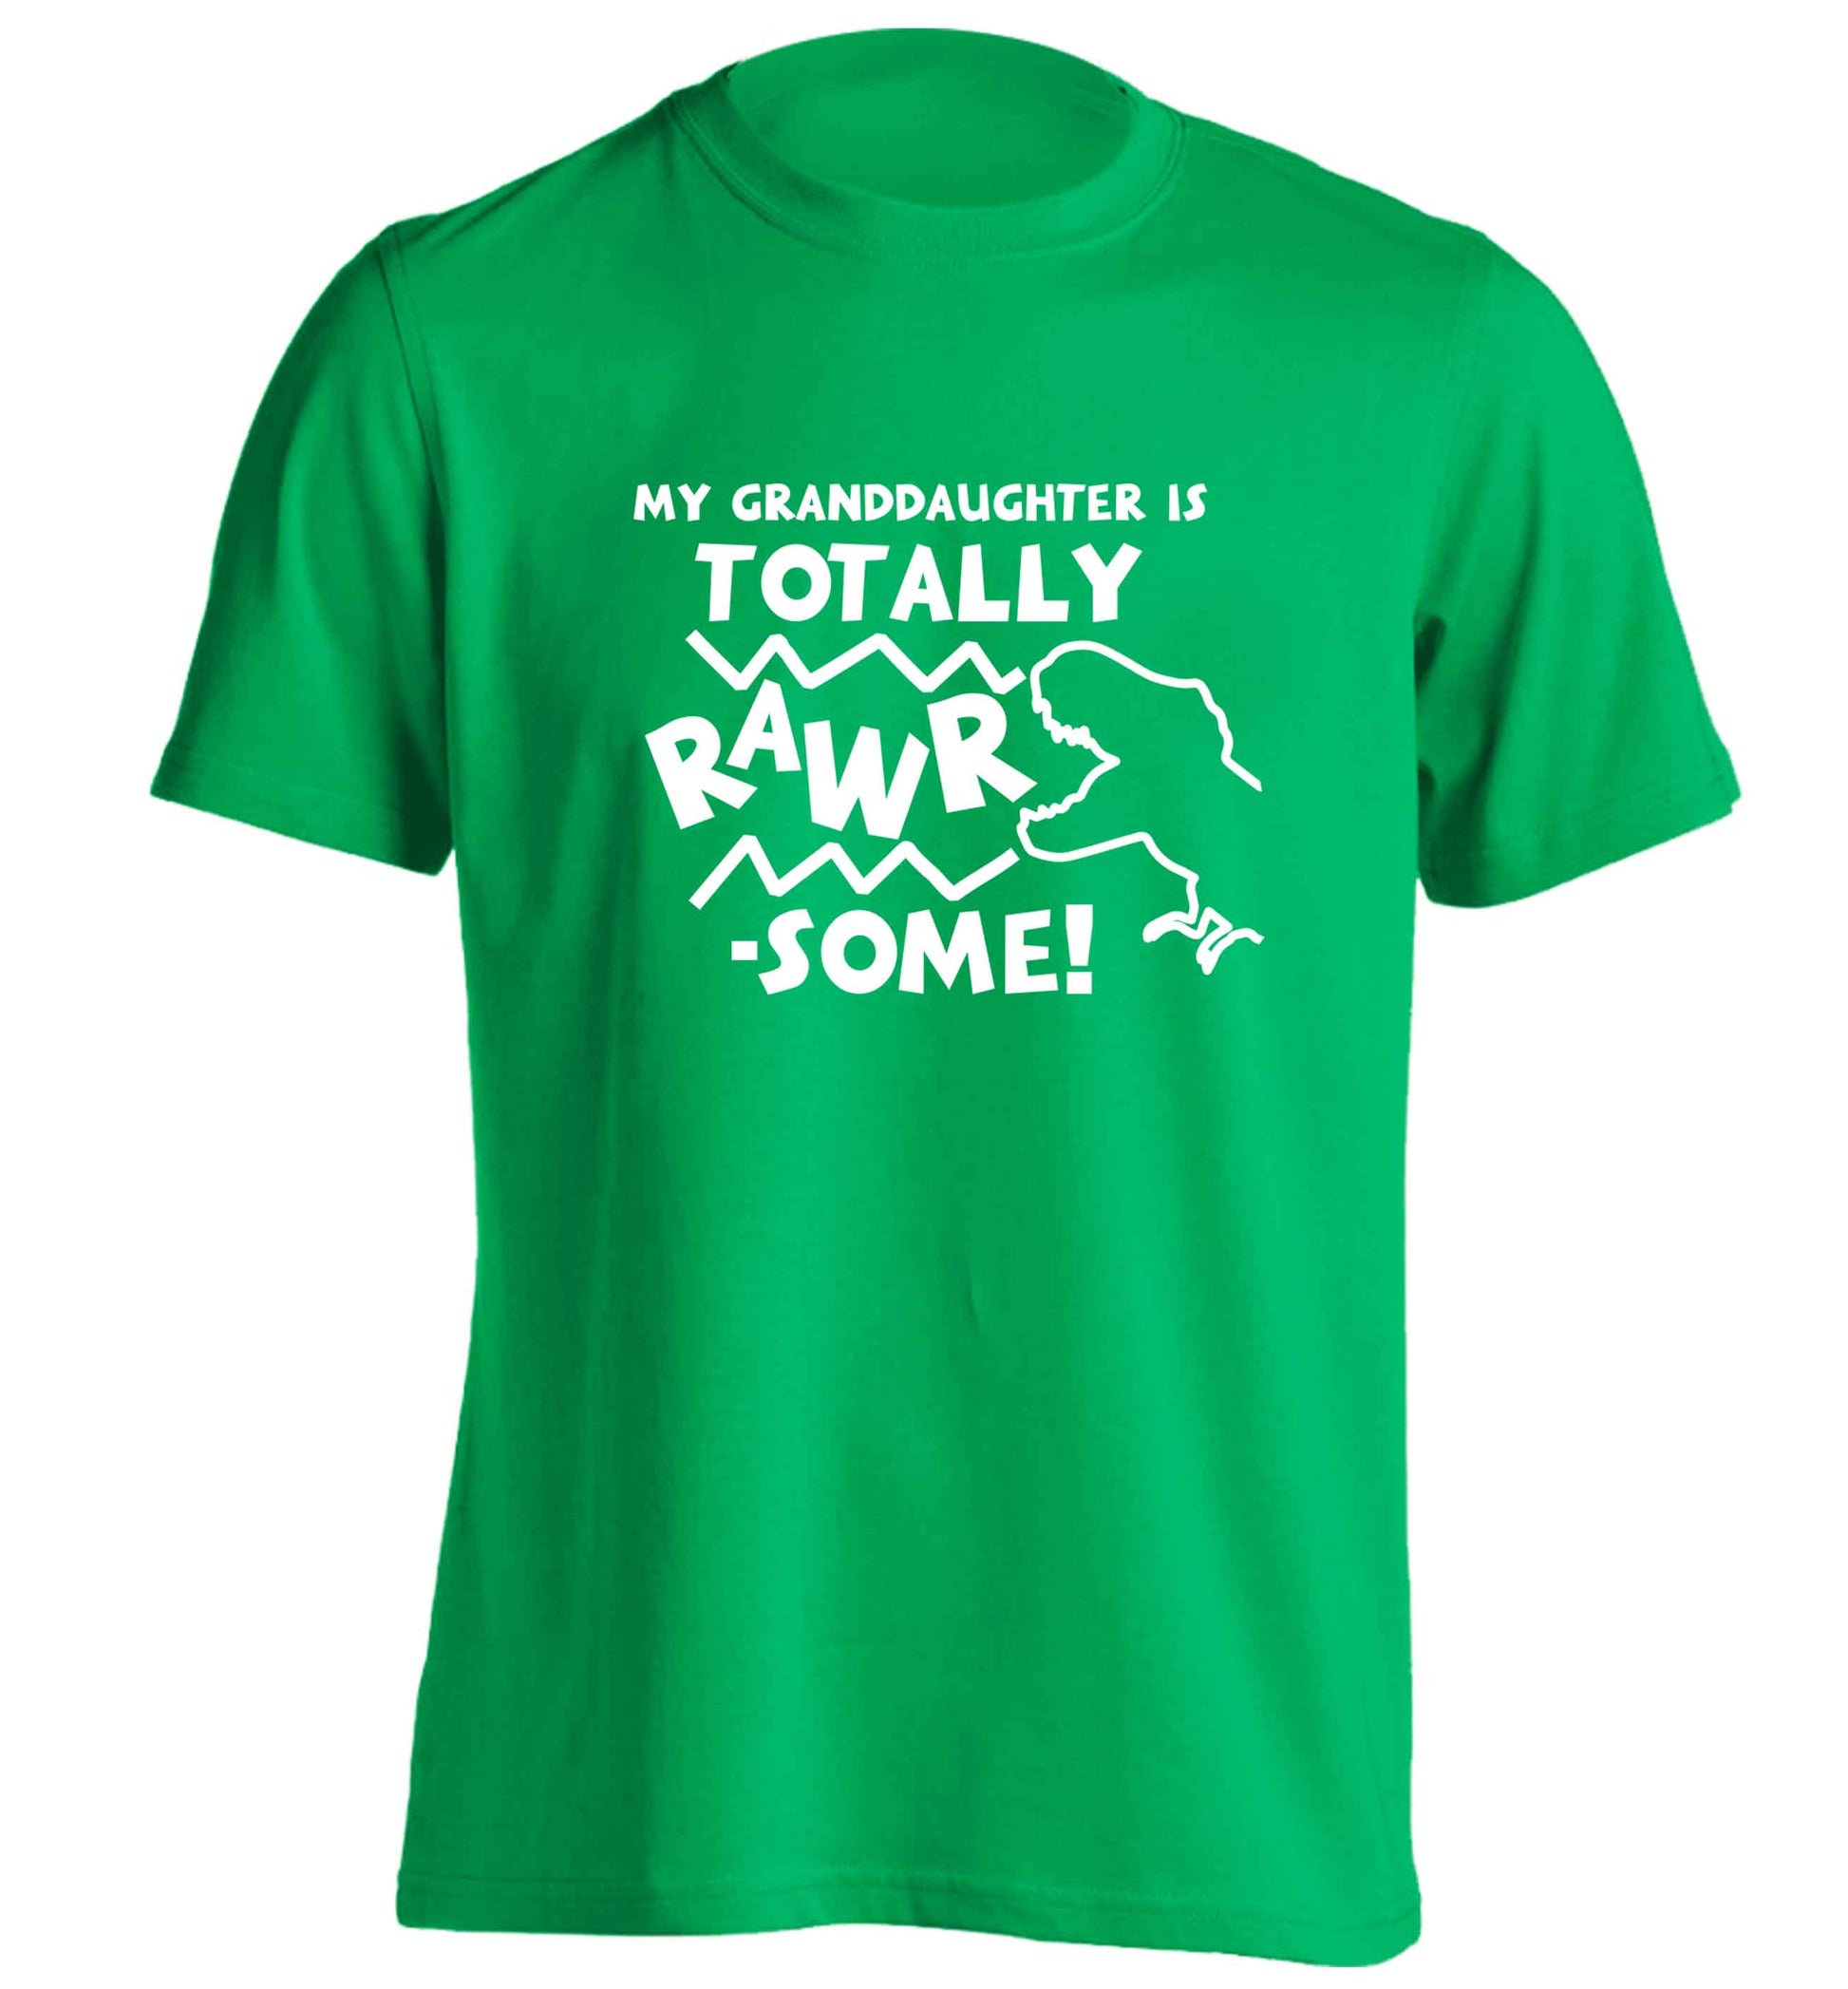 My granddaughter is totally rawrsome adults unisex green Tshirt small